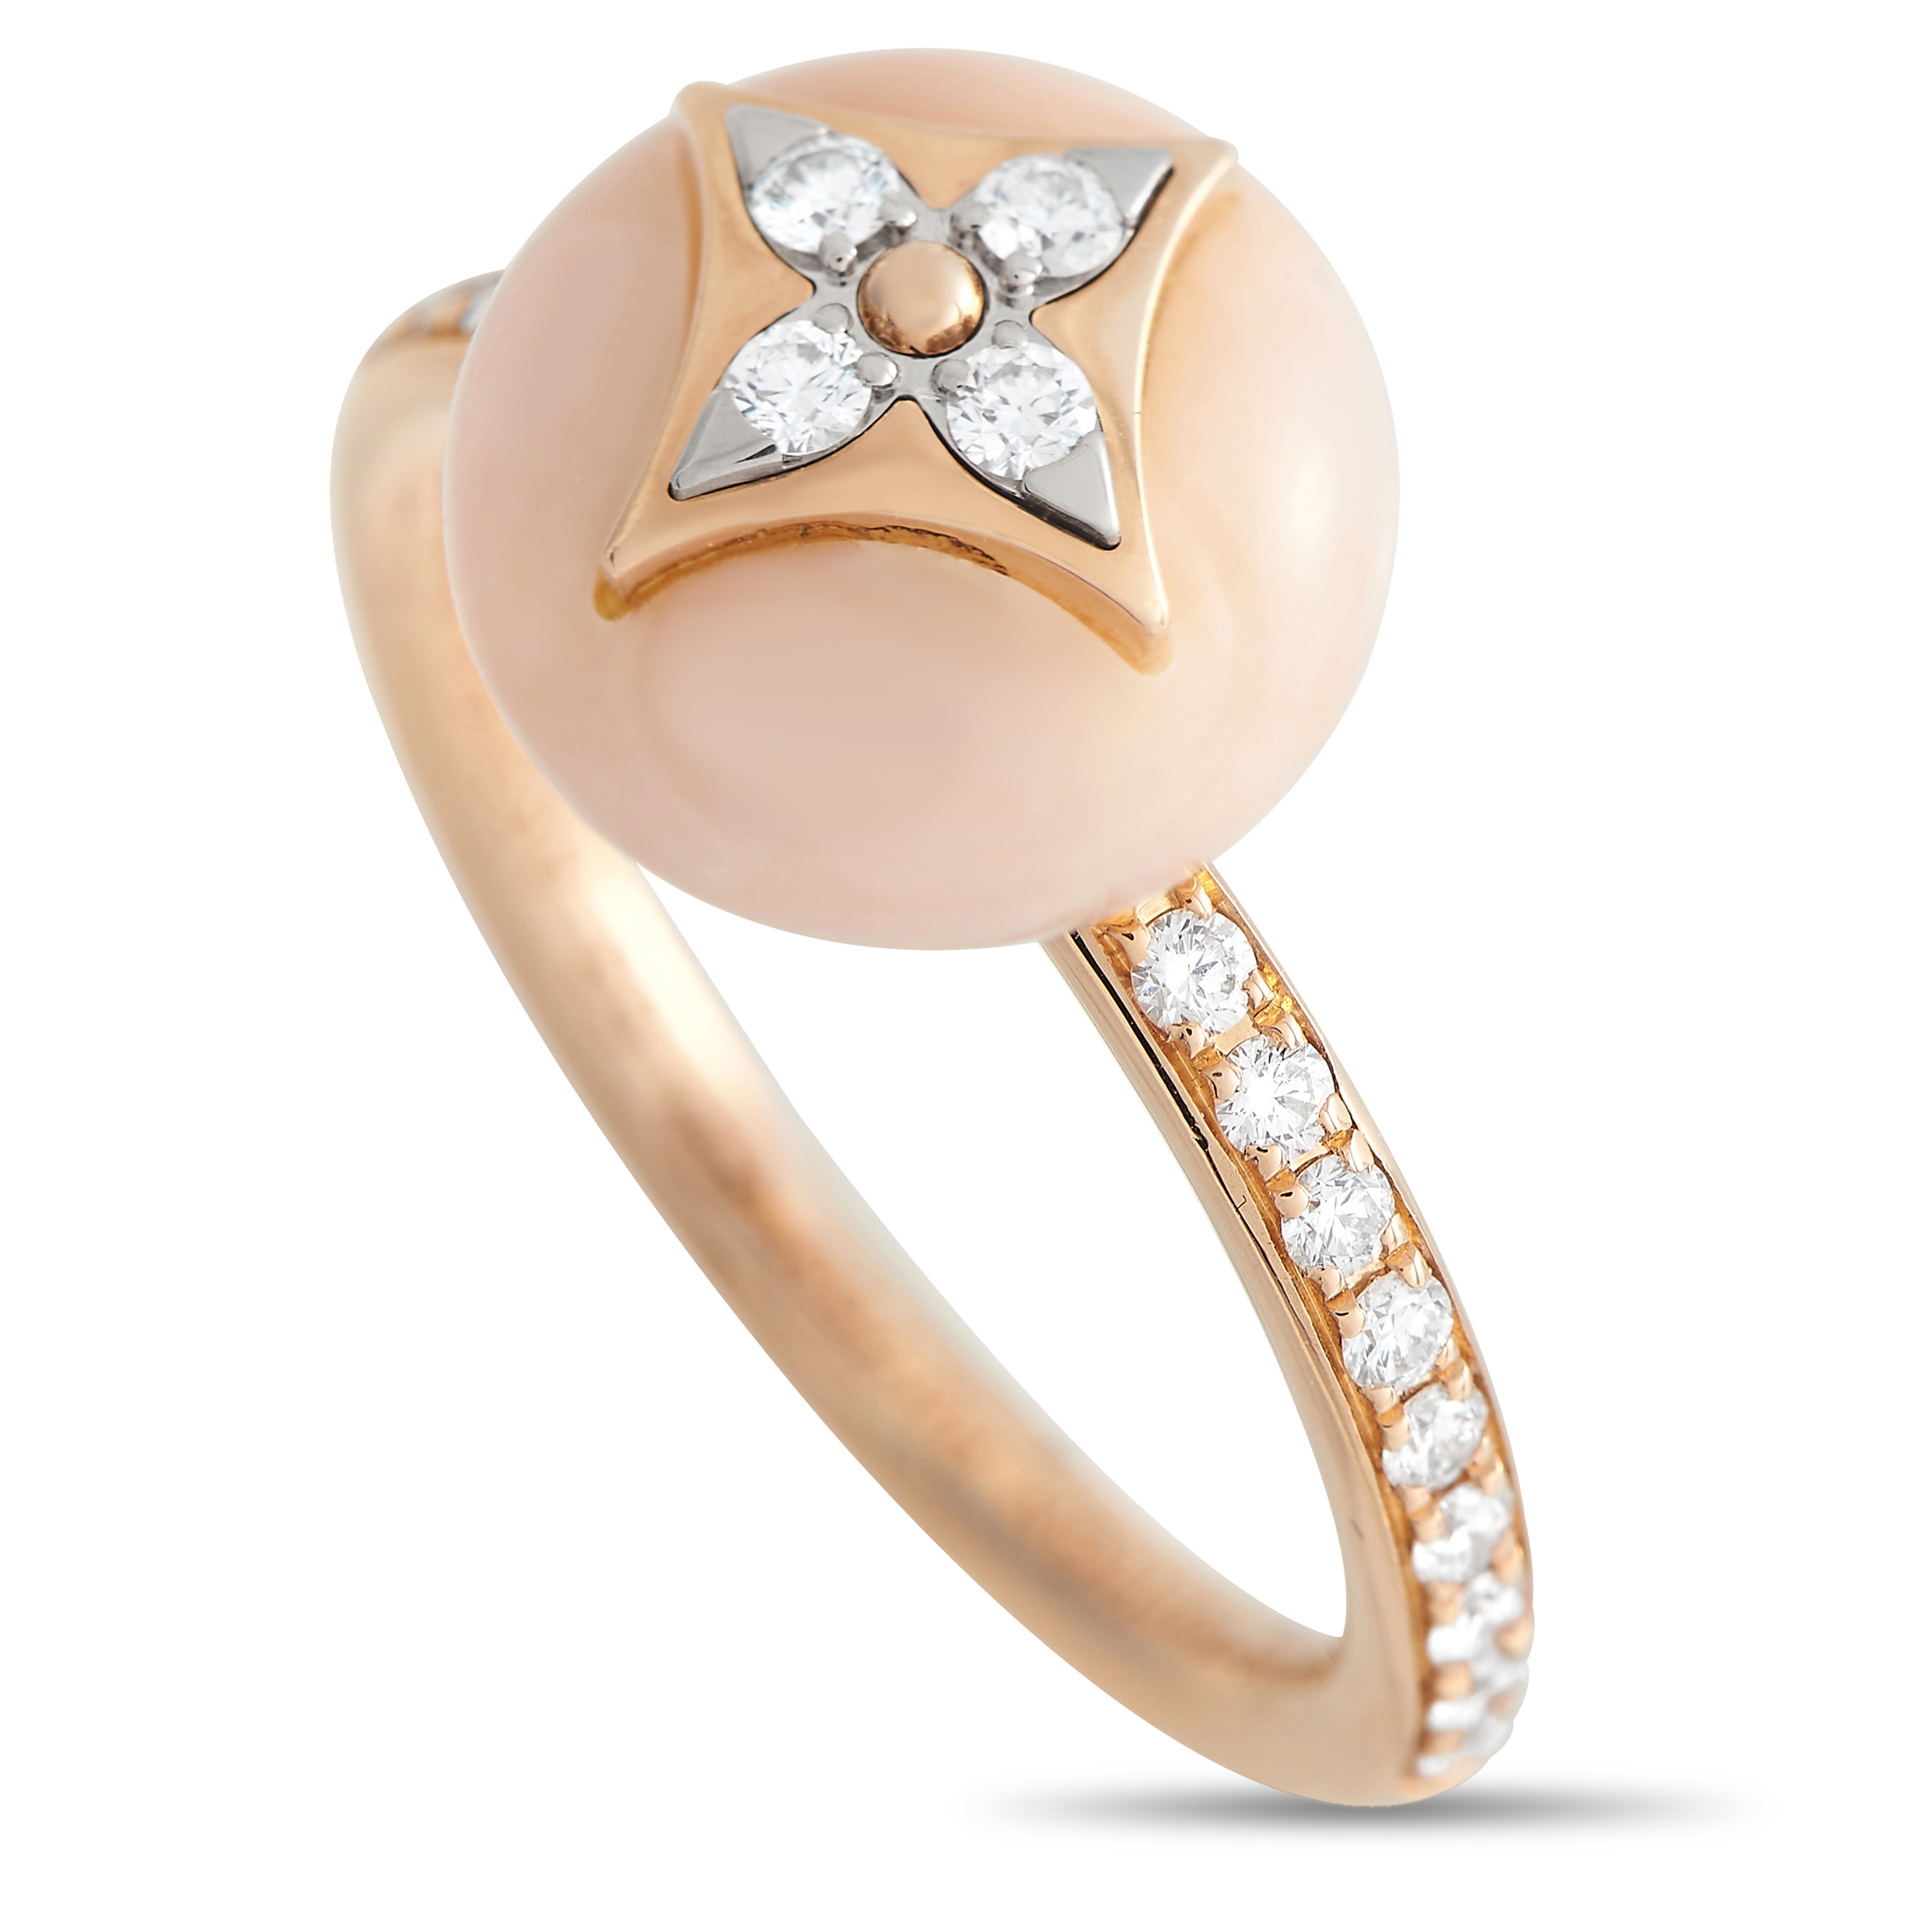 Louis Vuitton B Blossom Ring 18K Rose Gold and 18K White Gold with